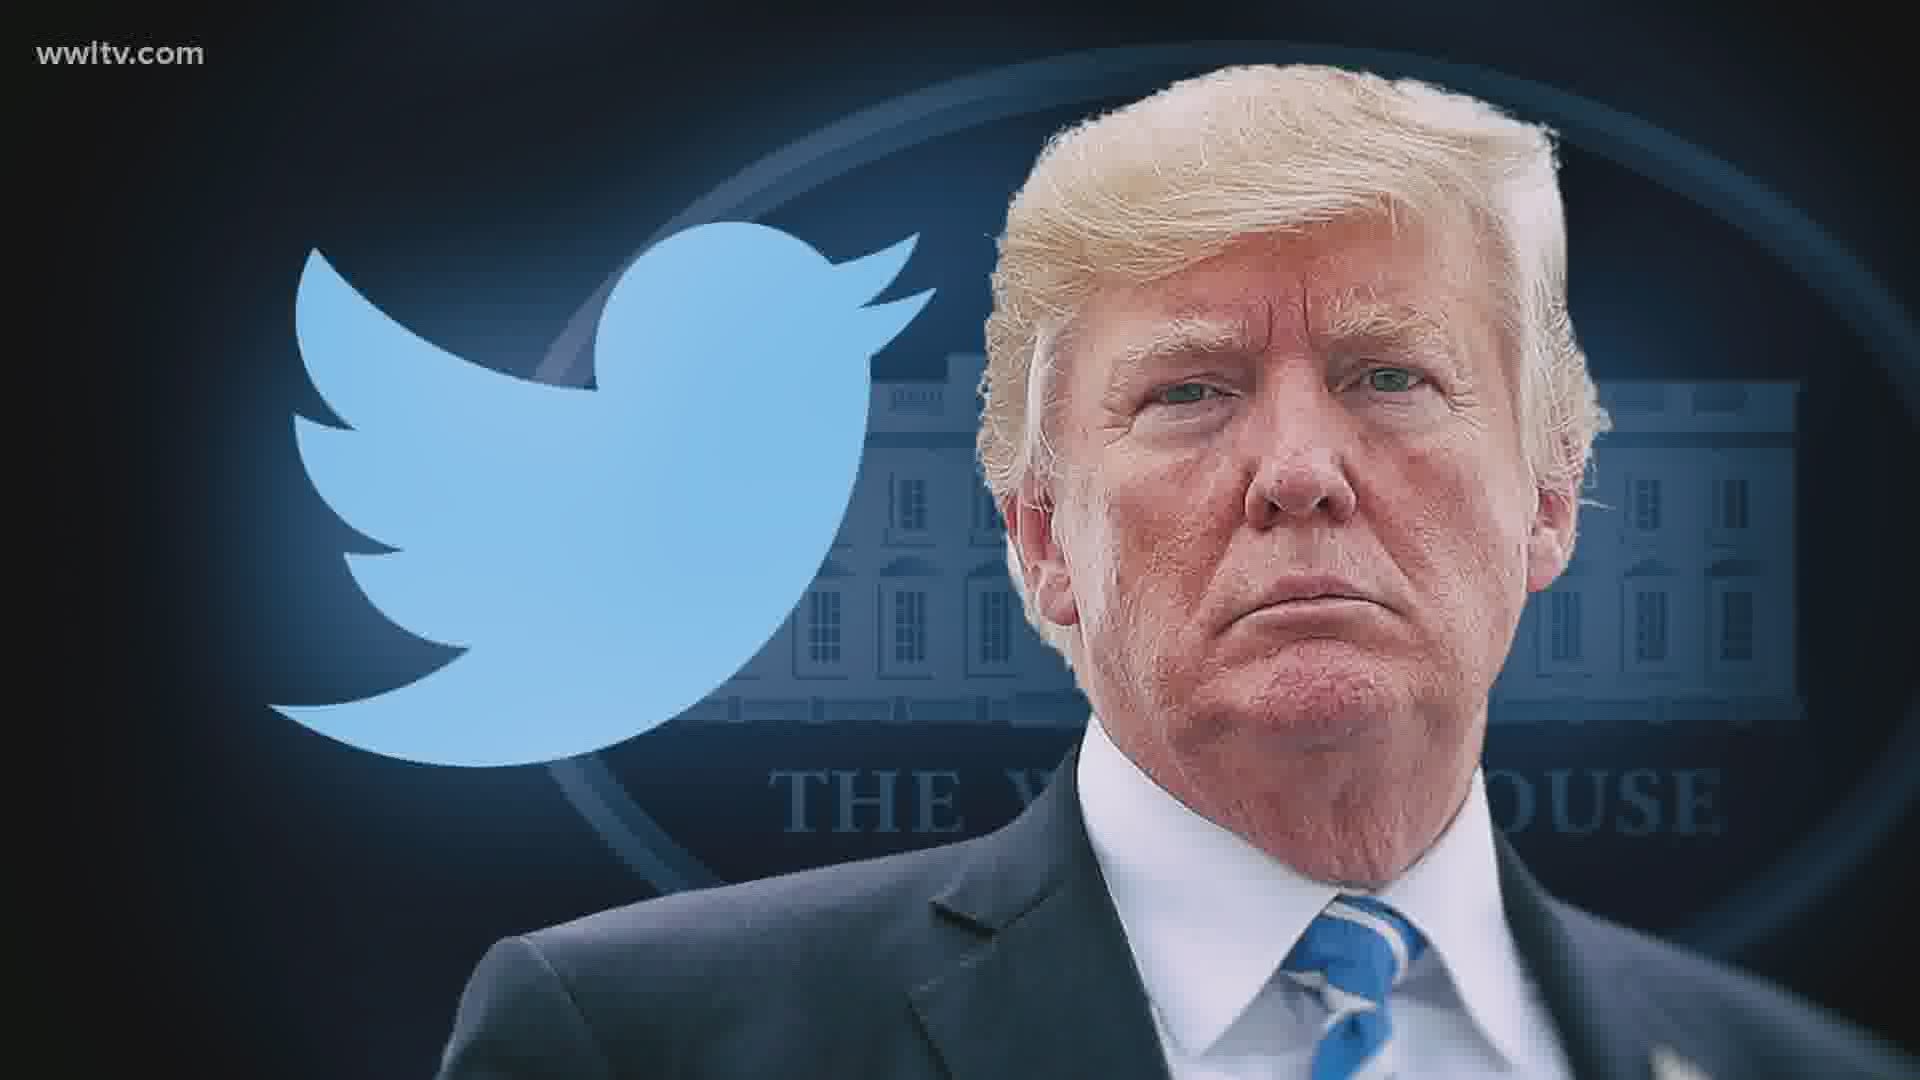 President Trump is threatening to take action against social media companies over what he says is censorship.